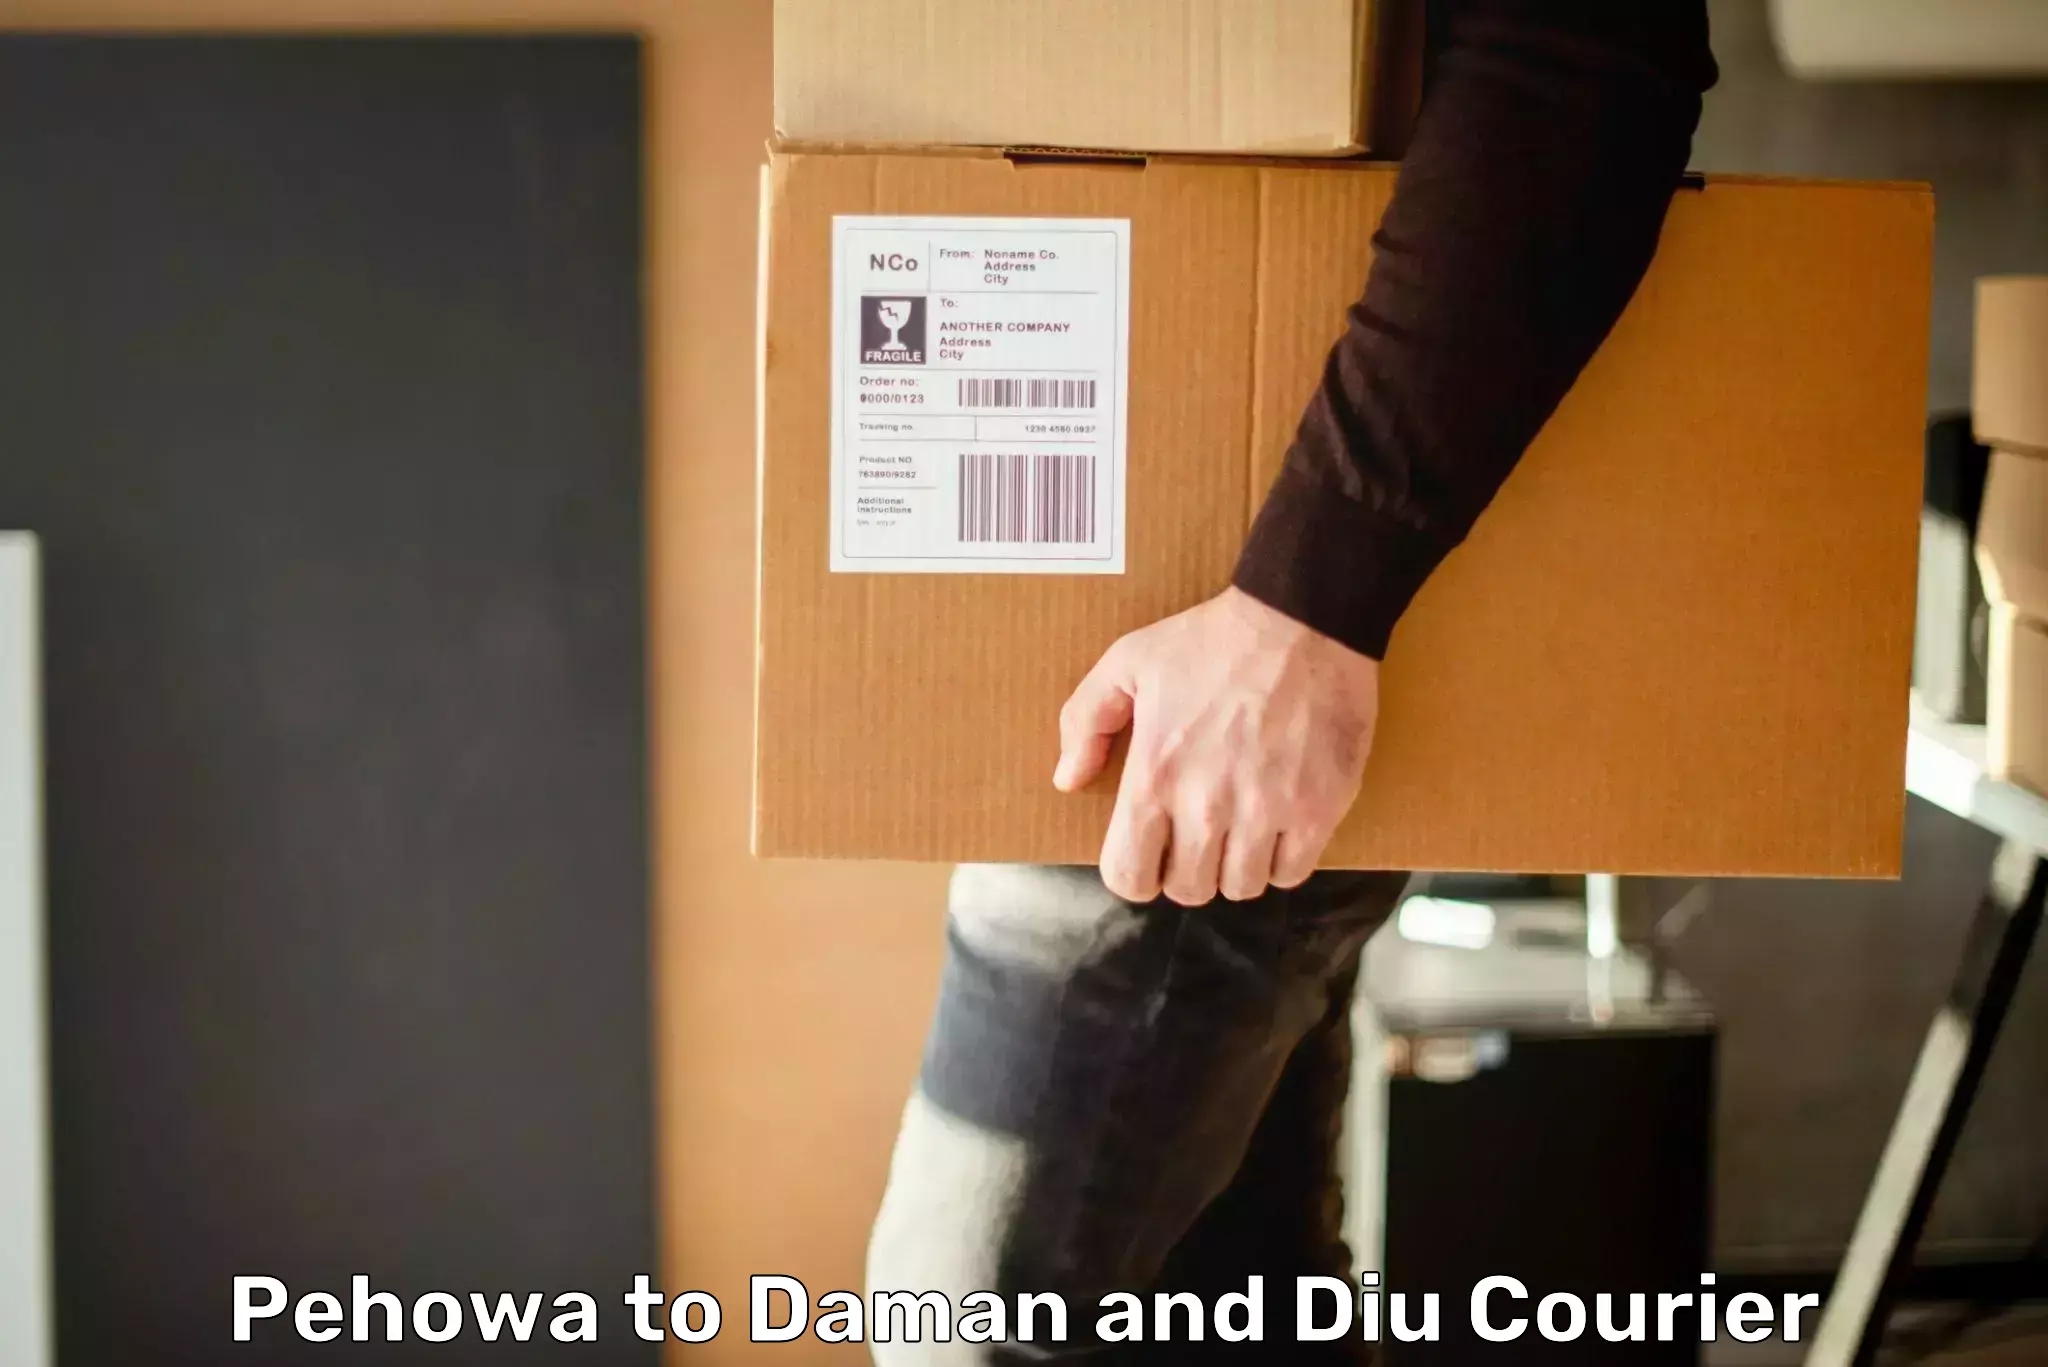 High-priority parcel service Pehowa to Daman and Diu